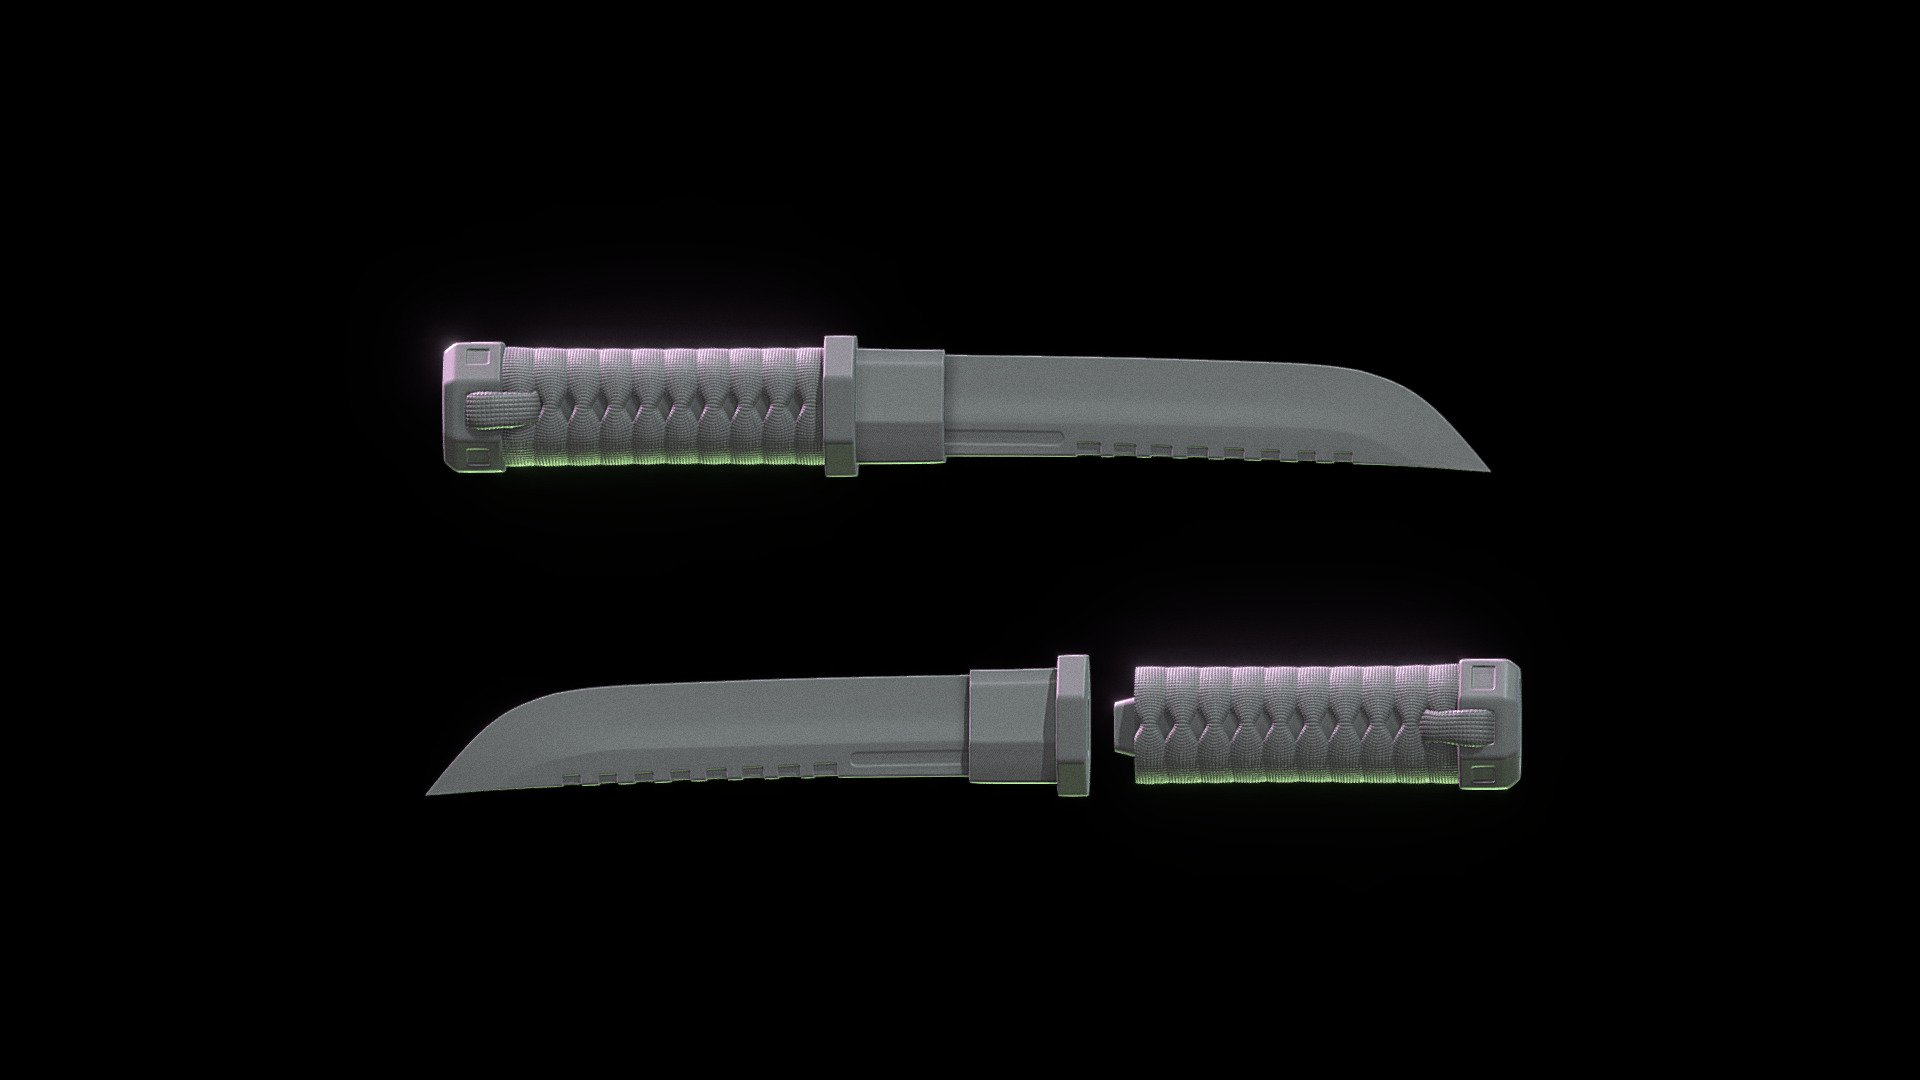 Watertight
Highpoly decimated 

Files attached.

Let me know if you have any requests.

Enjoy! - Katana Knife - 3D printing - Buy Royalty Free 3D model by Omassyx 3d model